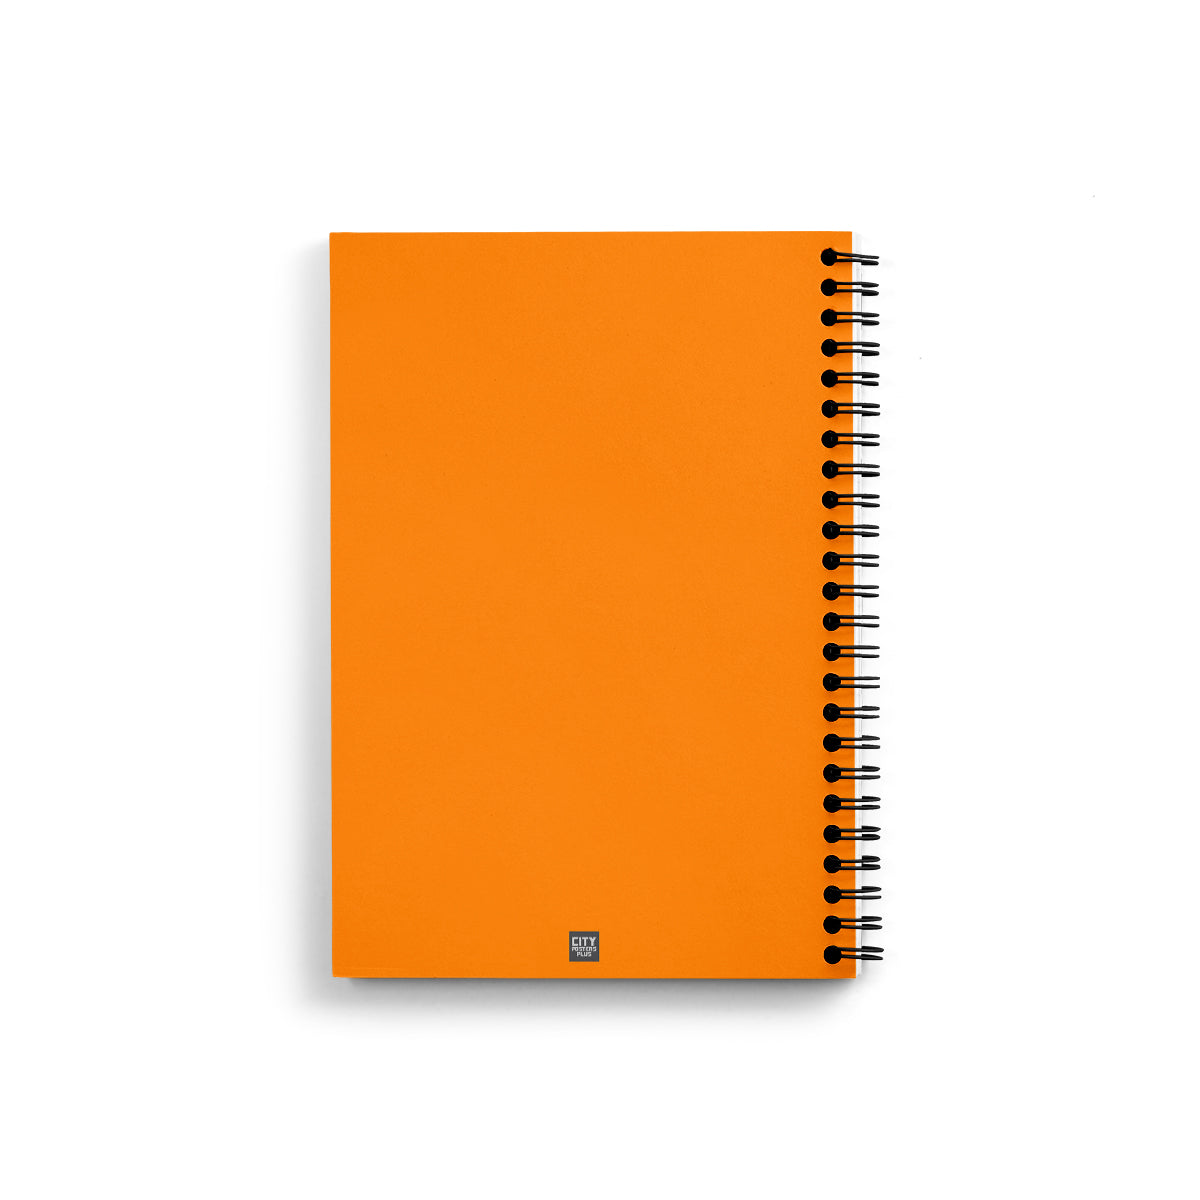 2085 Year Notebook (Orange, A5 Size, 100 Pages, Ruled)